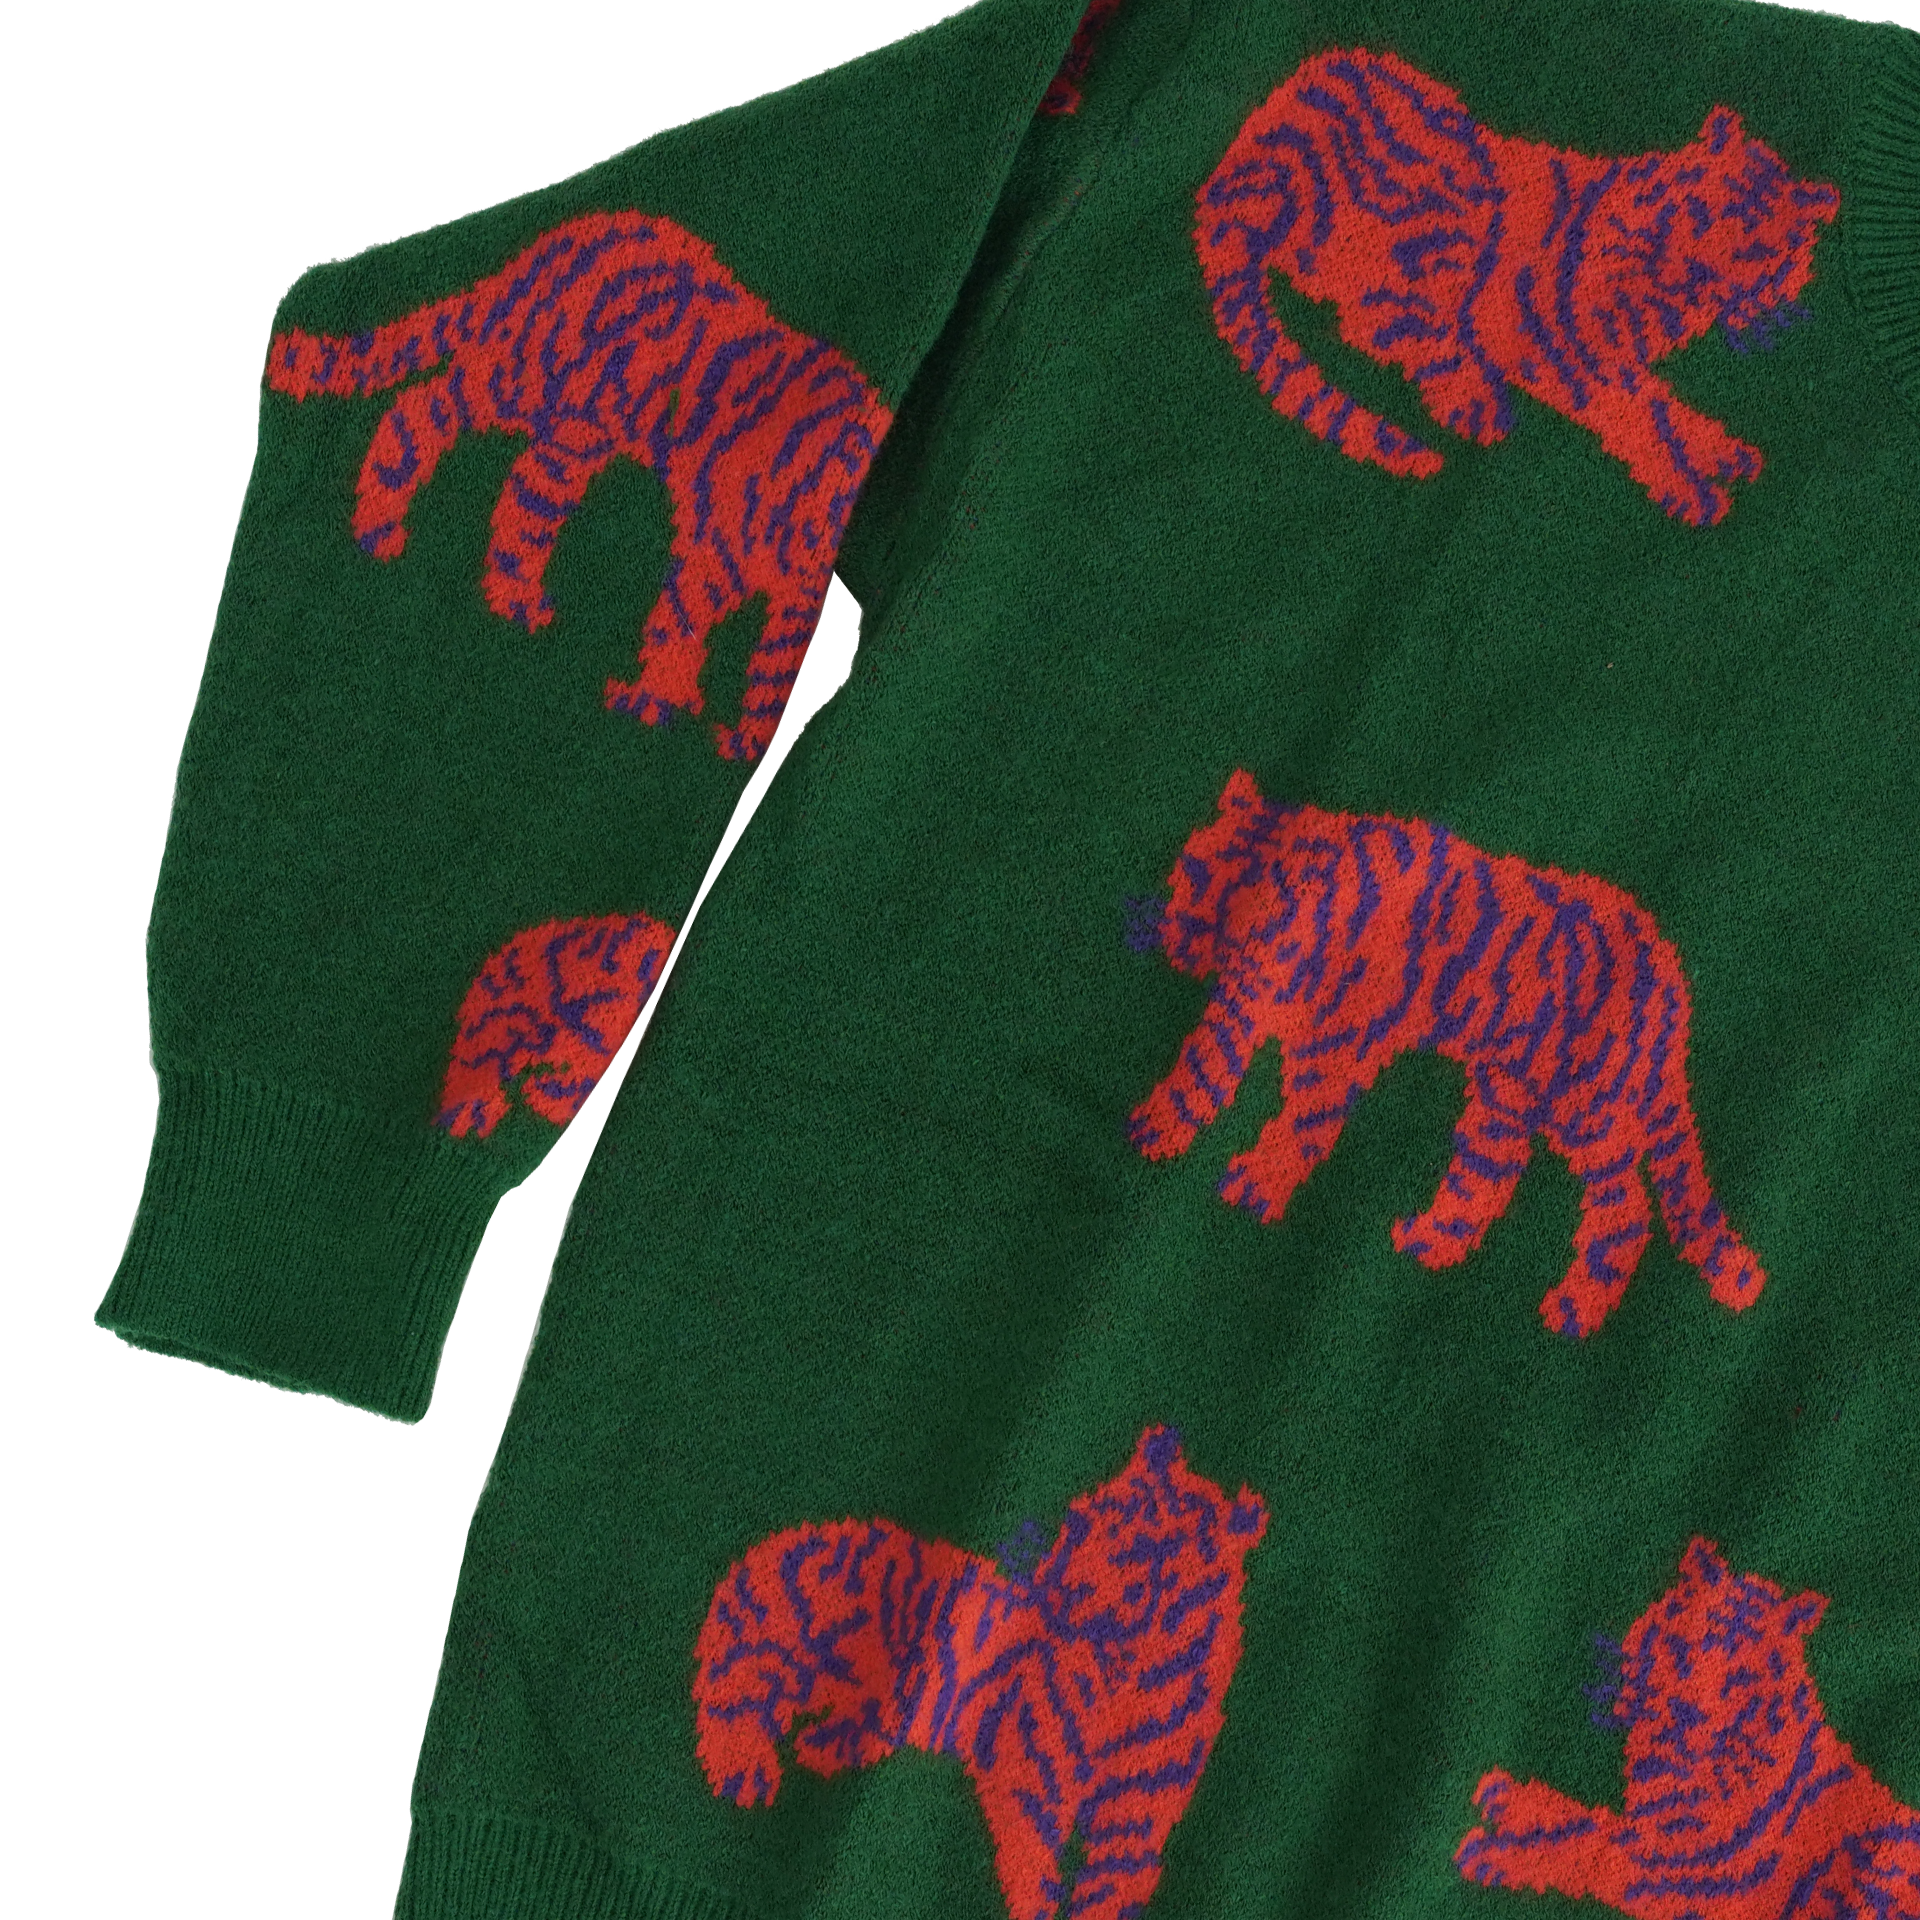 LIMITED - TIGER KNIT SWEATER - WOMEN'S